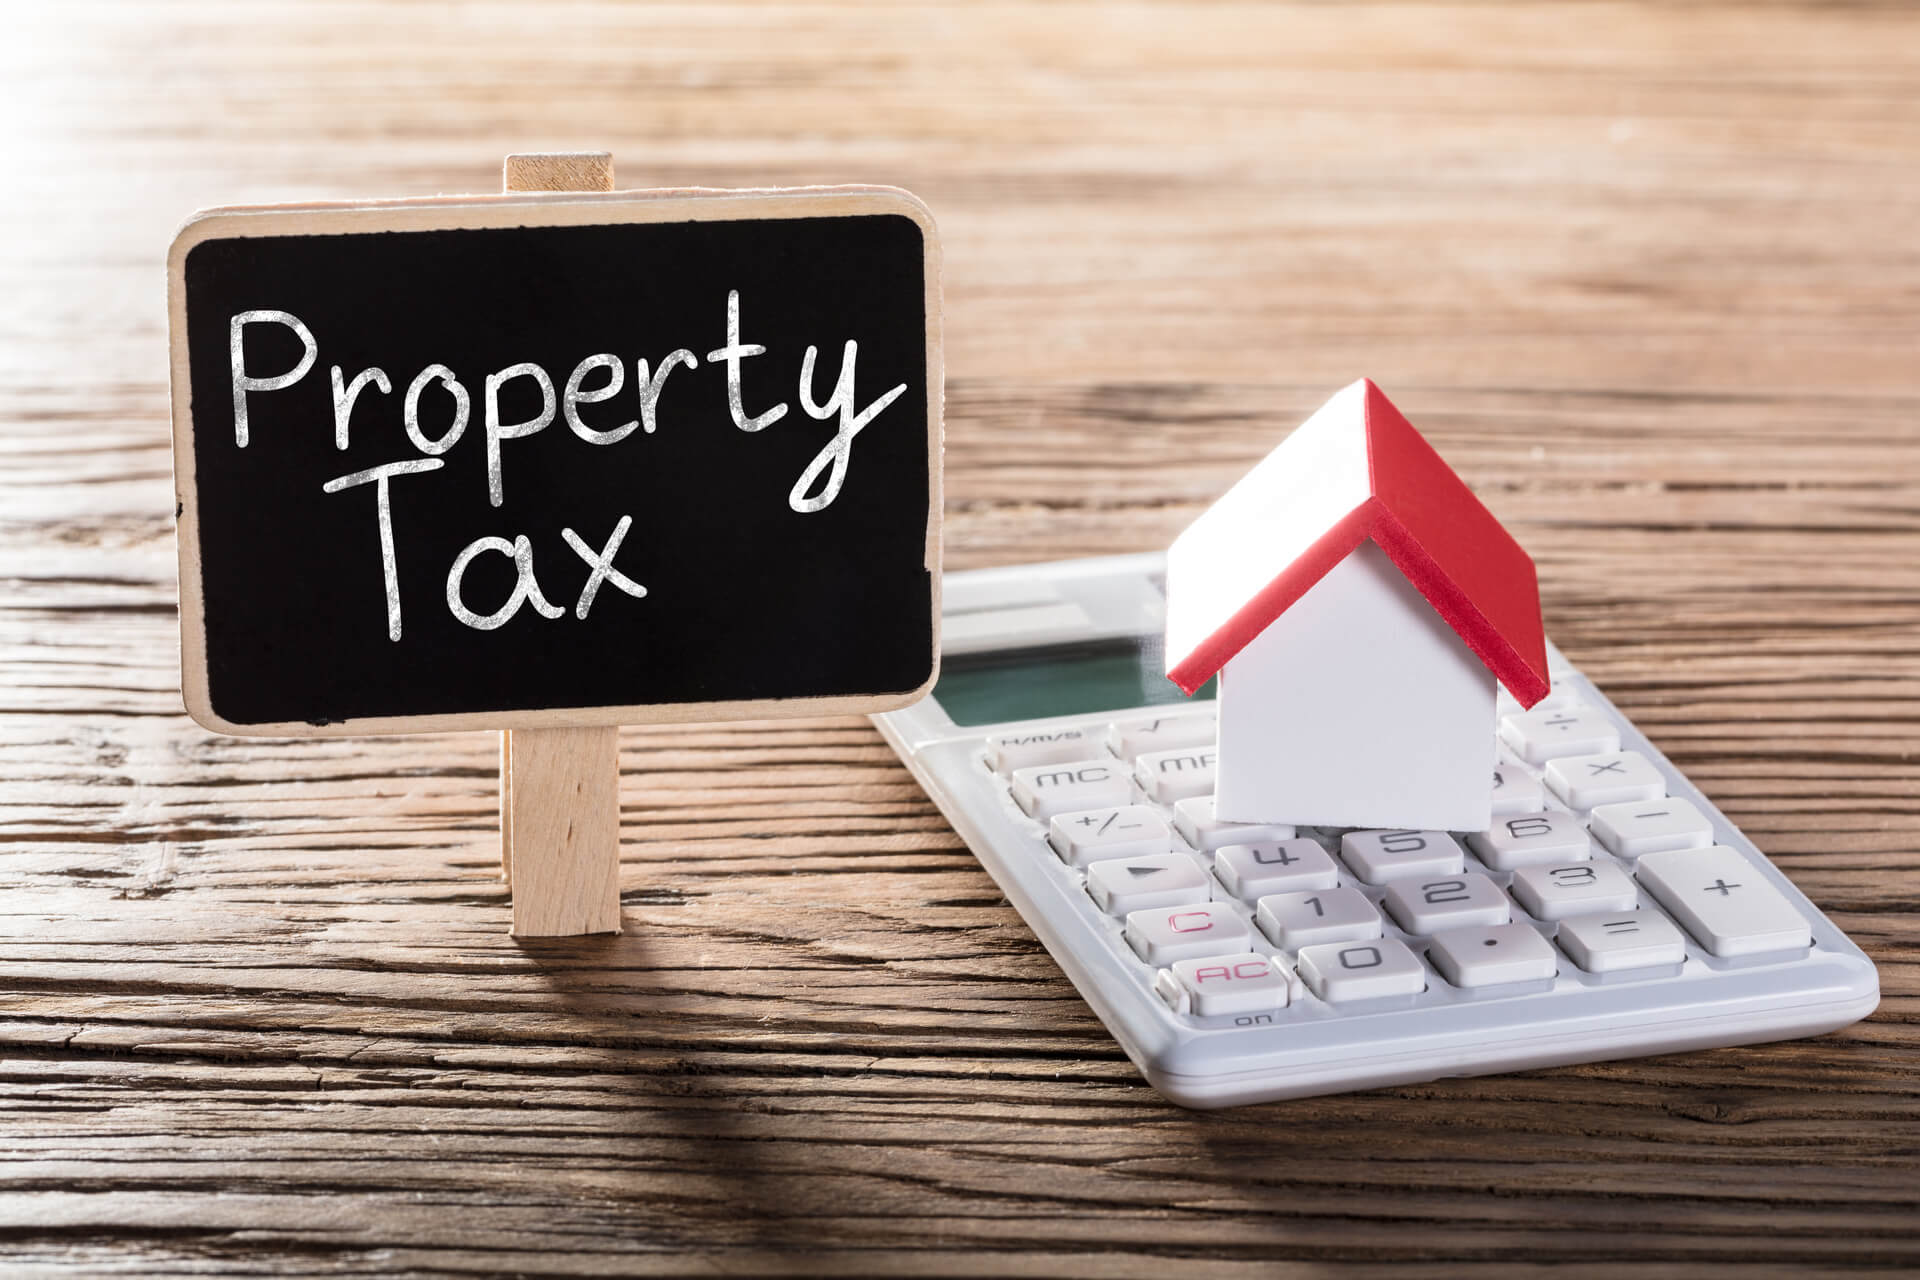 5-common-real-estate-tax-mistakes-property-tax-consultant-tips